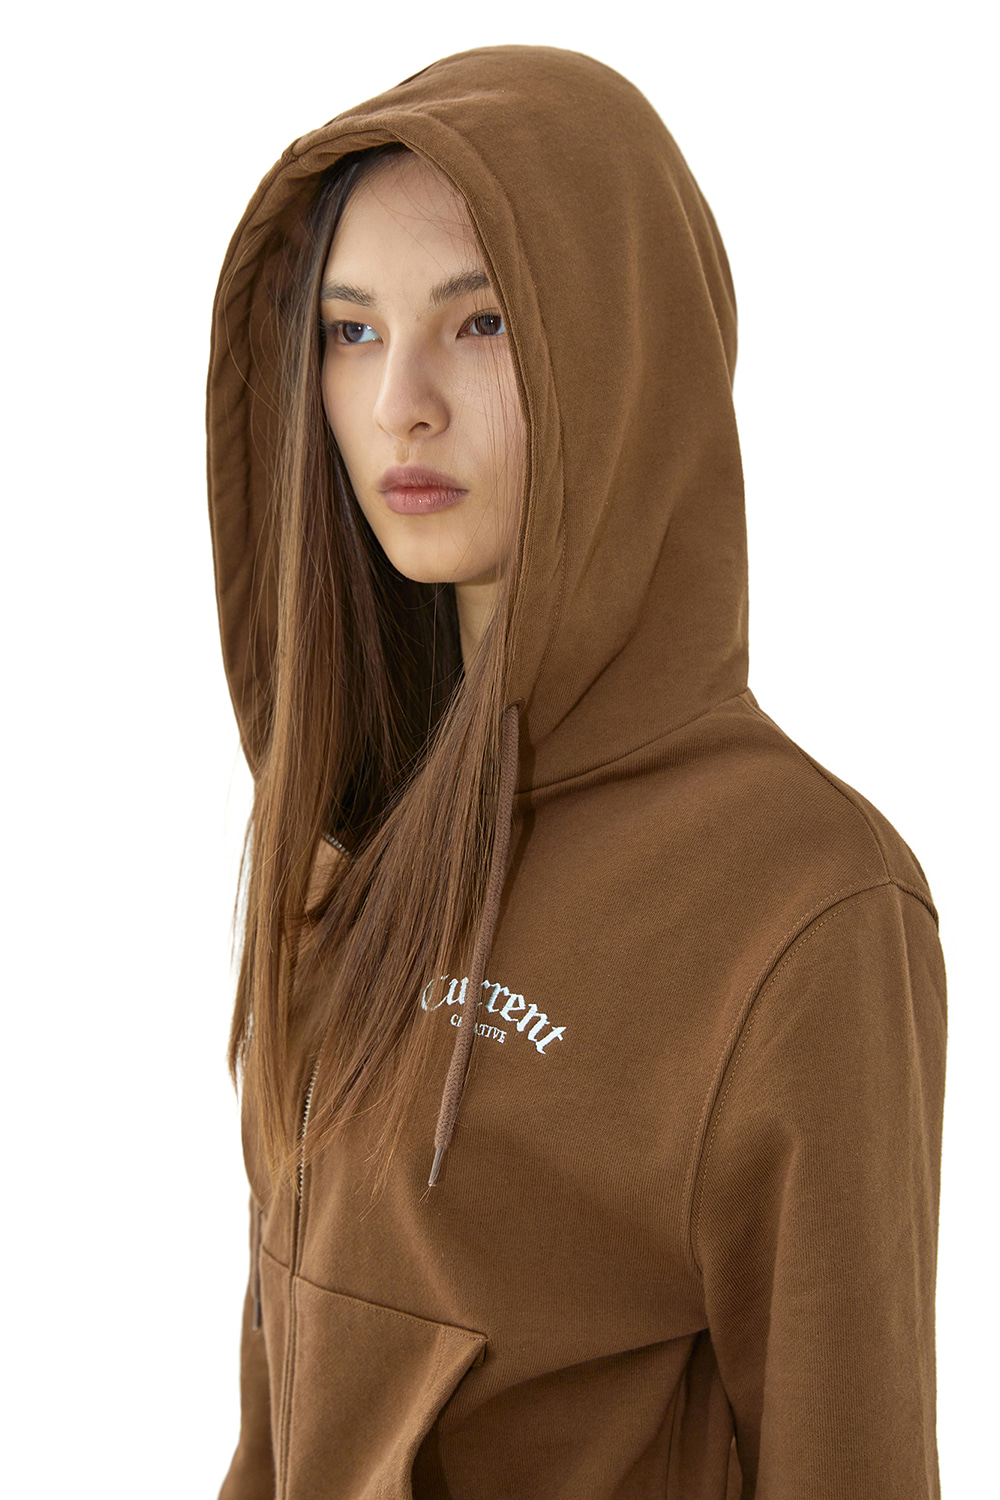 CURRENT HOODED JERSEY TOP [BROWN]		